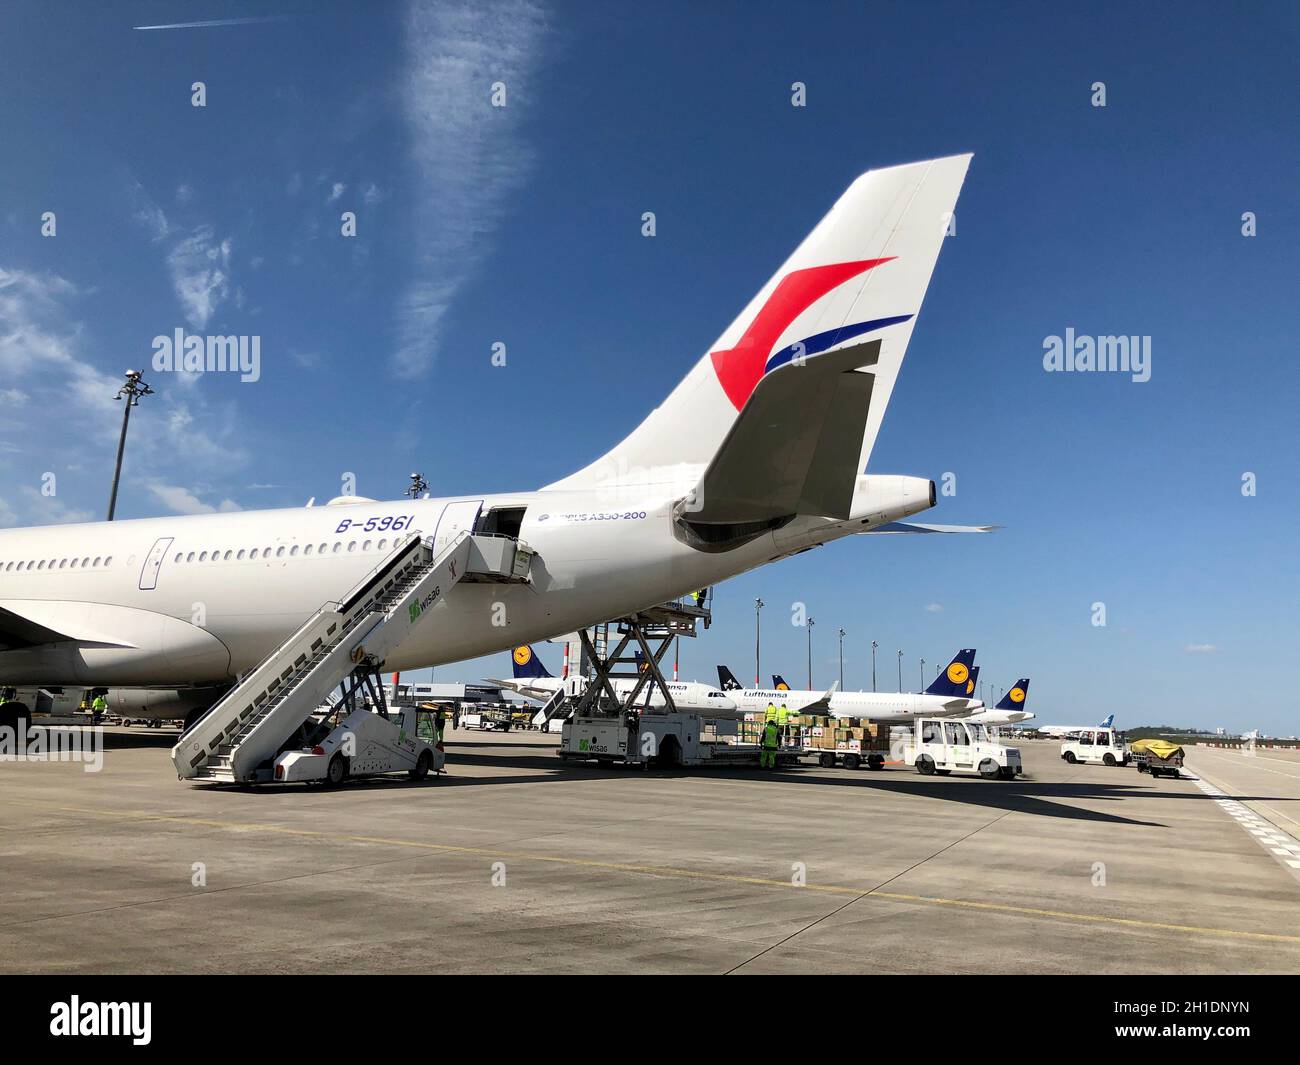 Around 12:00 p.m., an Airbus A330-200 from China Eastern landed at Berlin-Brandenburg Airport to probably deliver a larger load with the urgently need Stock Photo